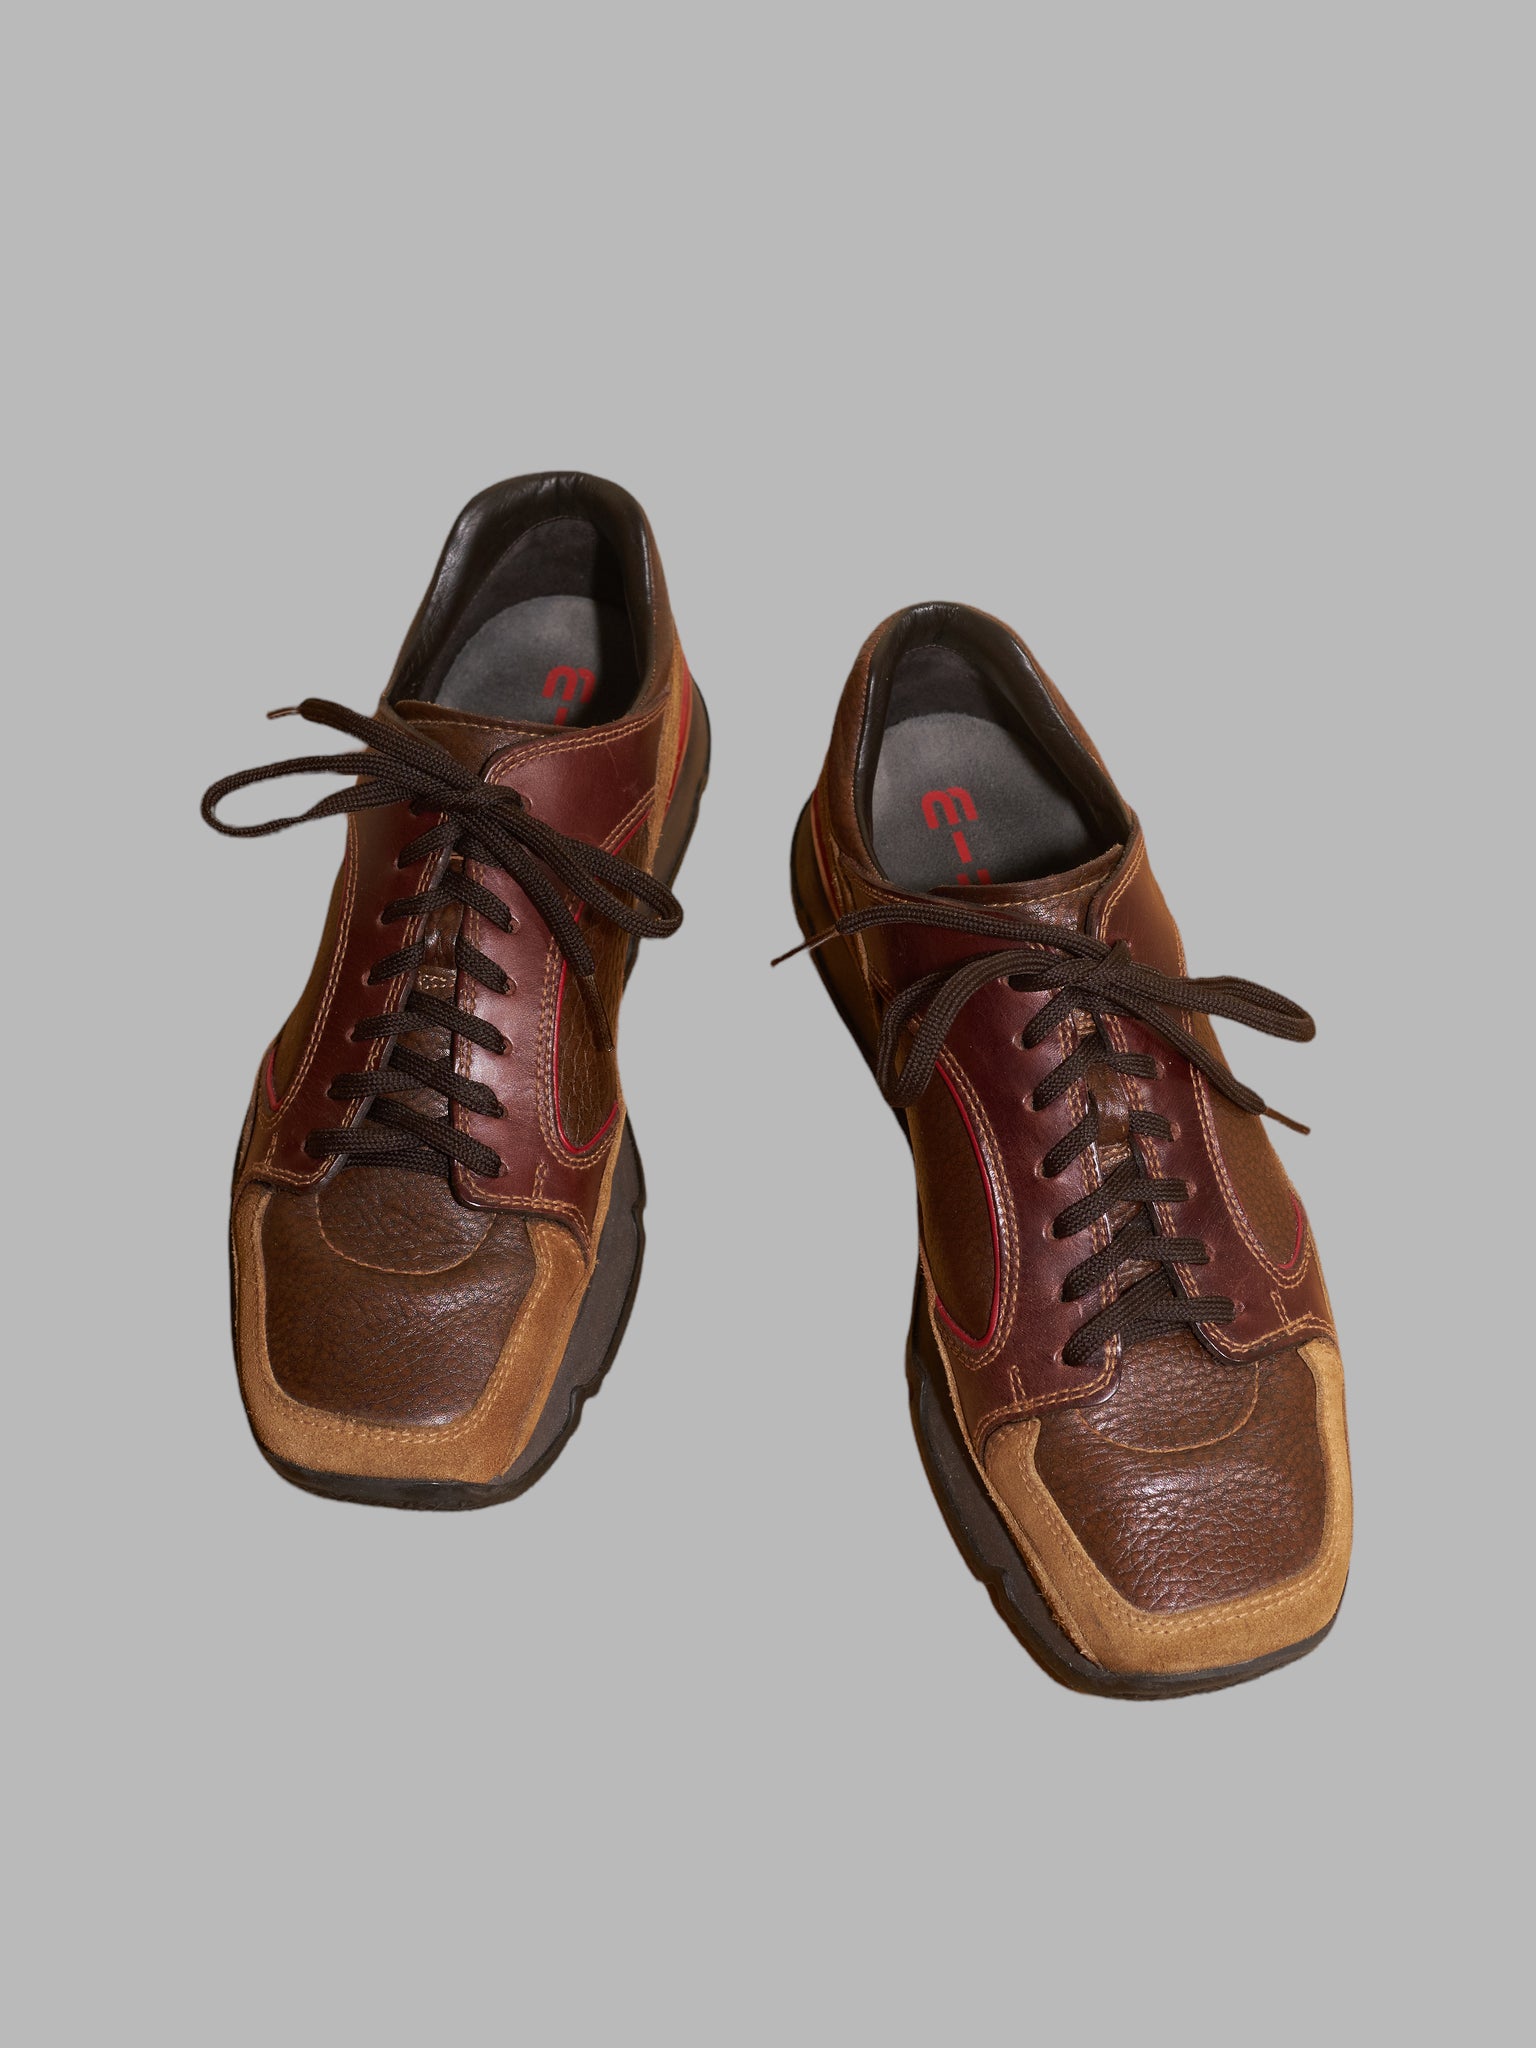 Miu Miu mens 1990s brown leather sneakers with red accents - UK 6 US 7 EU 40